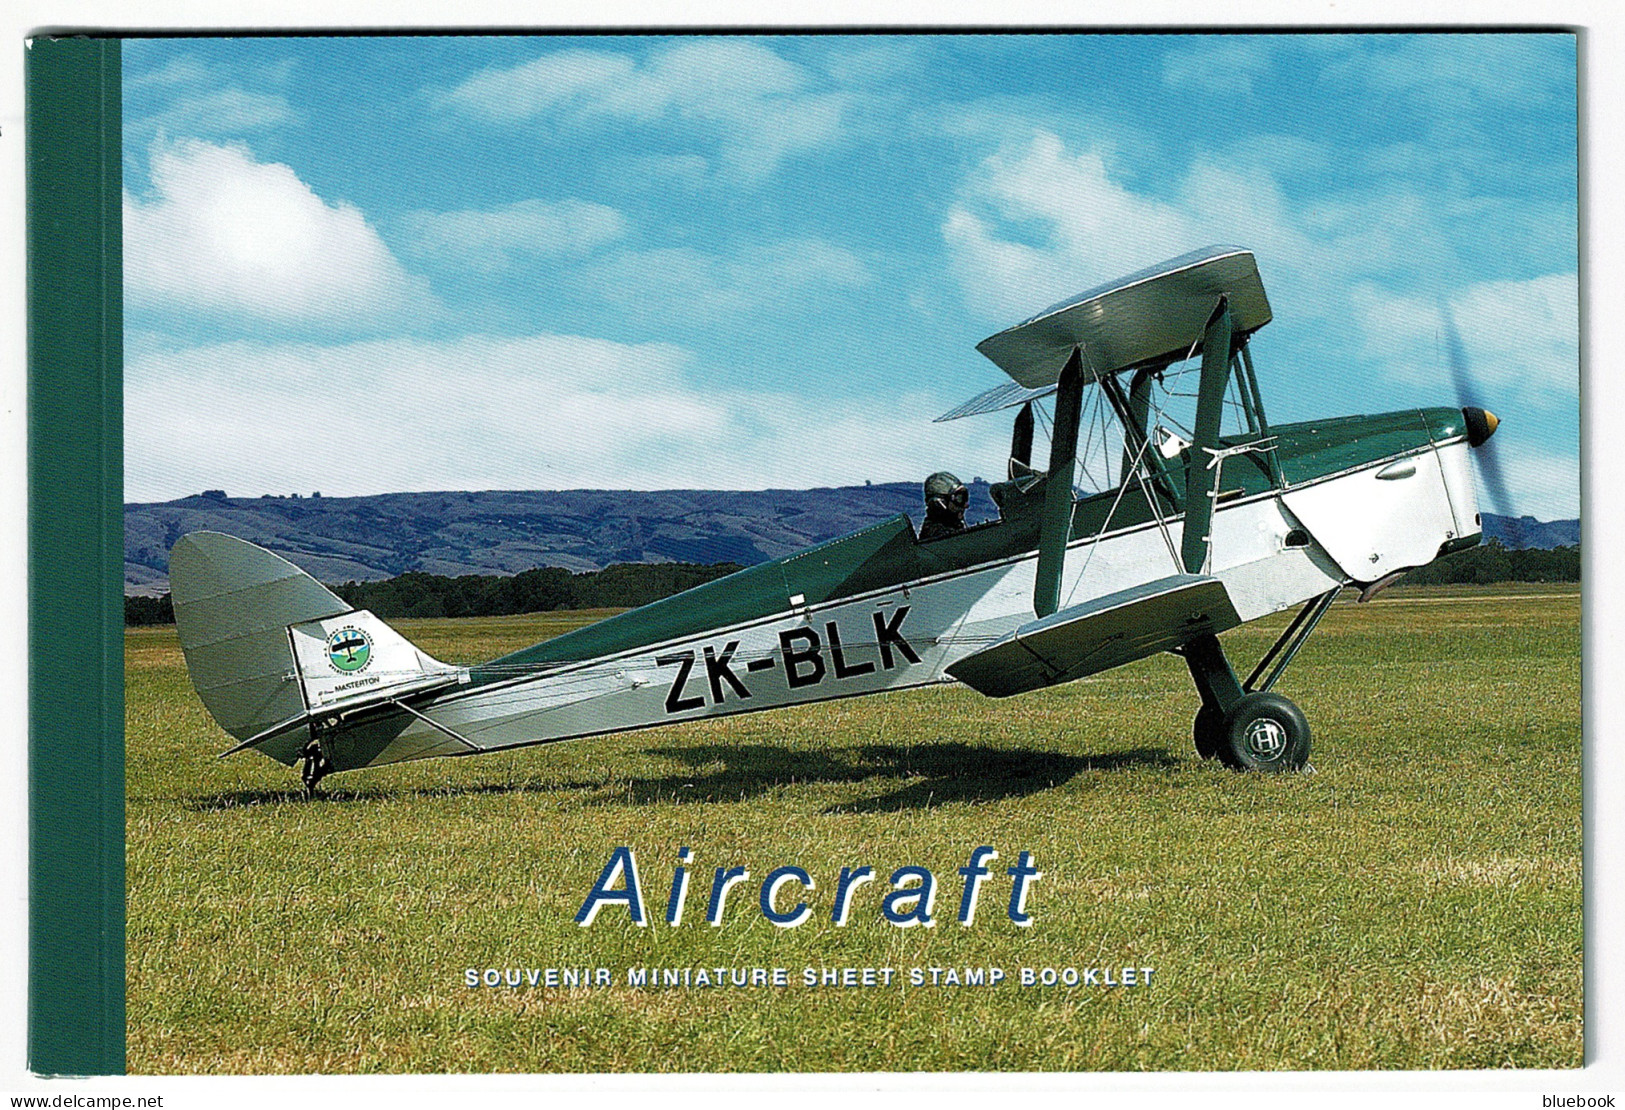 Ref 1602 - New Zealand Aviation Stamp Booklet - Aircraft With 7 Miniature Sheets - Carnets